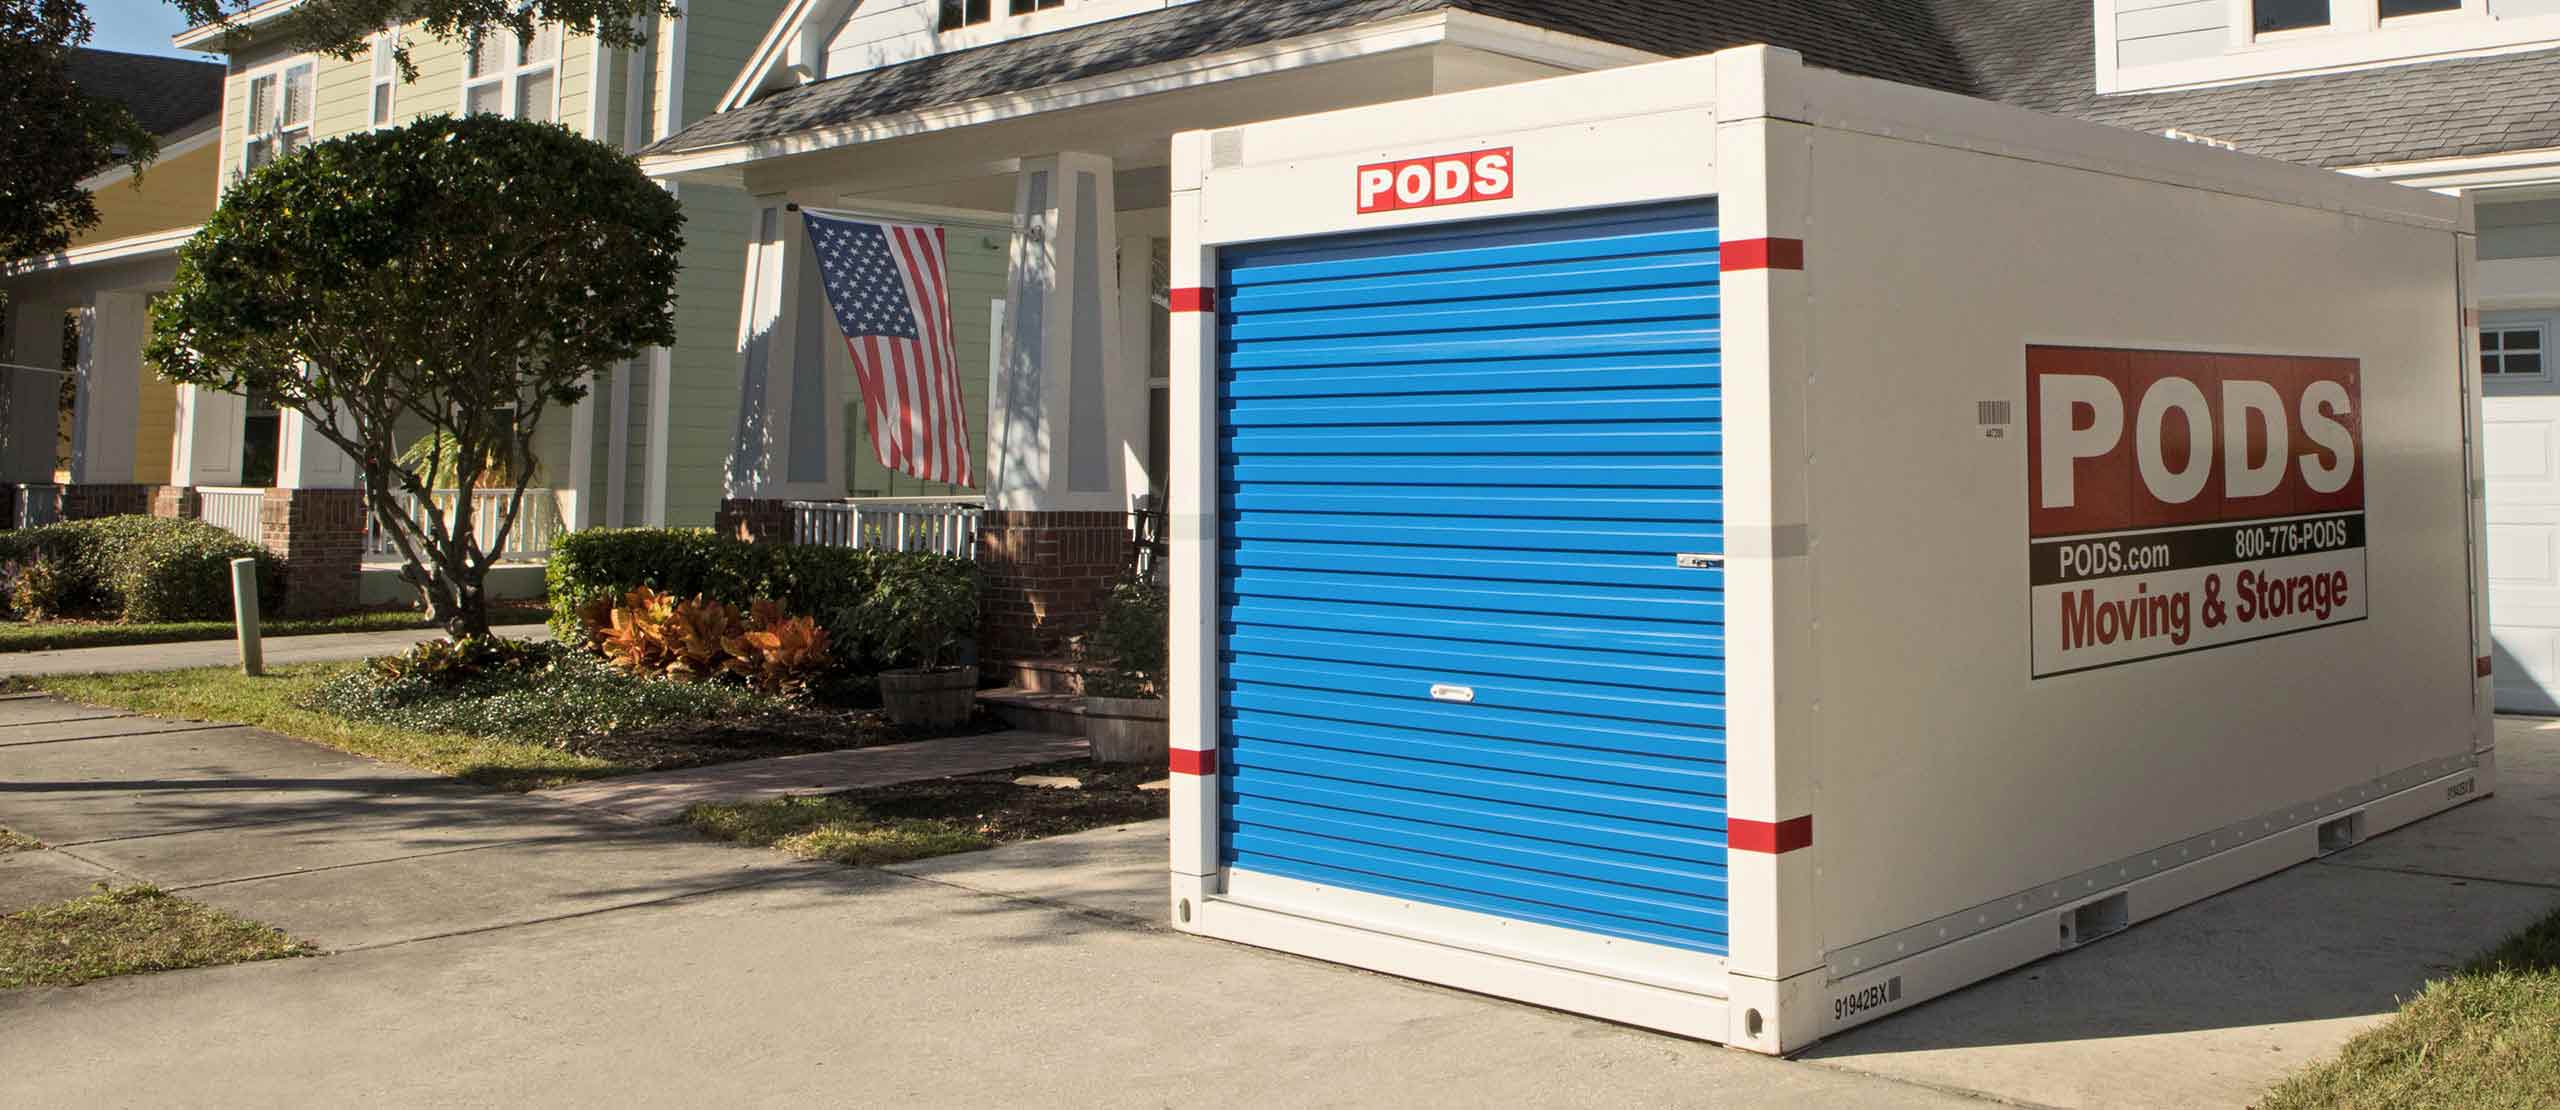 Moving & Storage Container Sizes | PODS